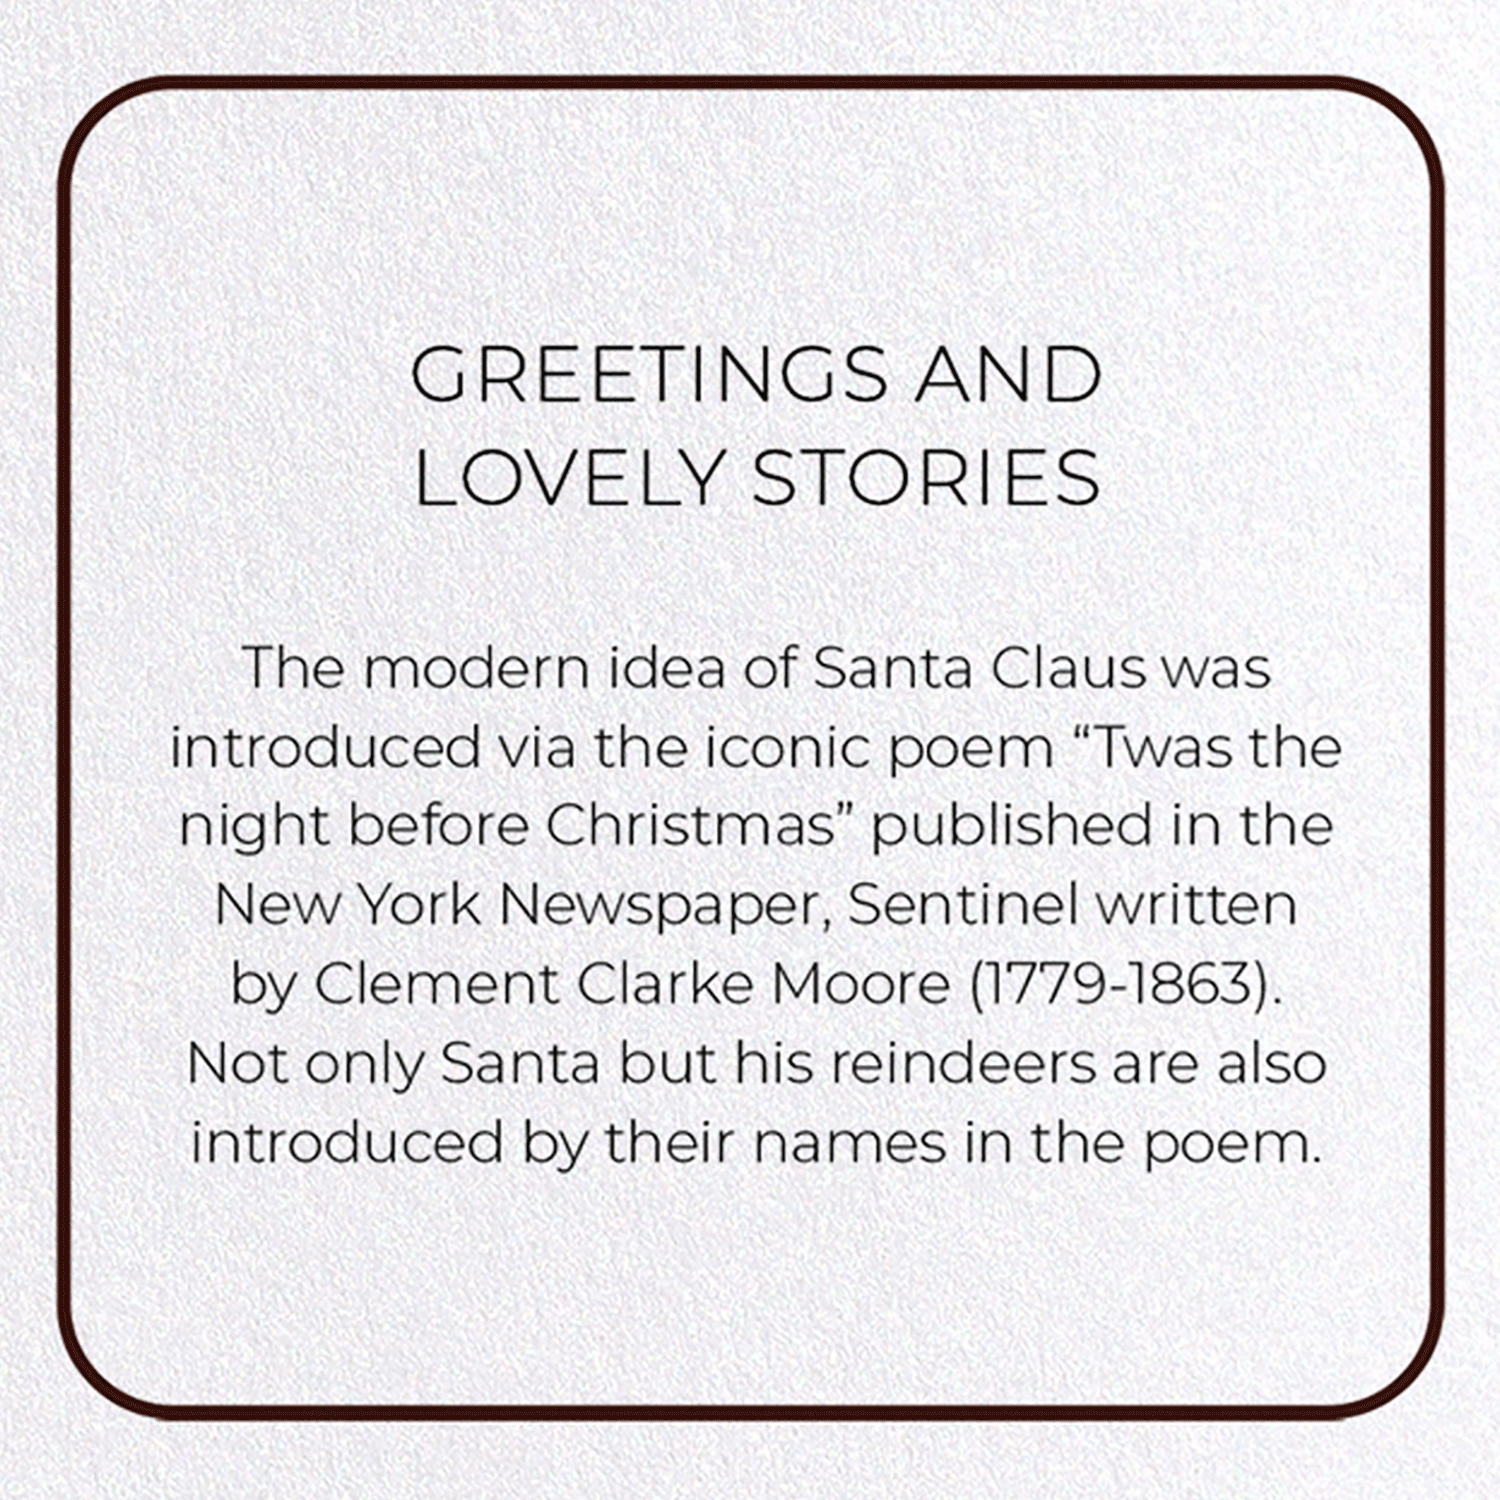 GREETINGS AND LOVELY STORIES